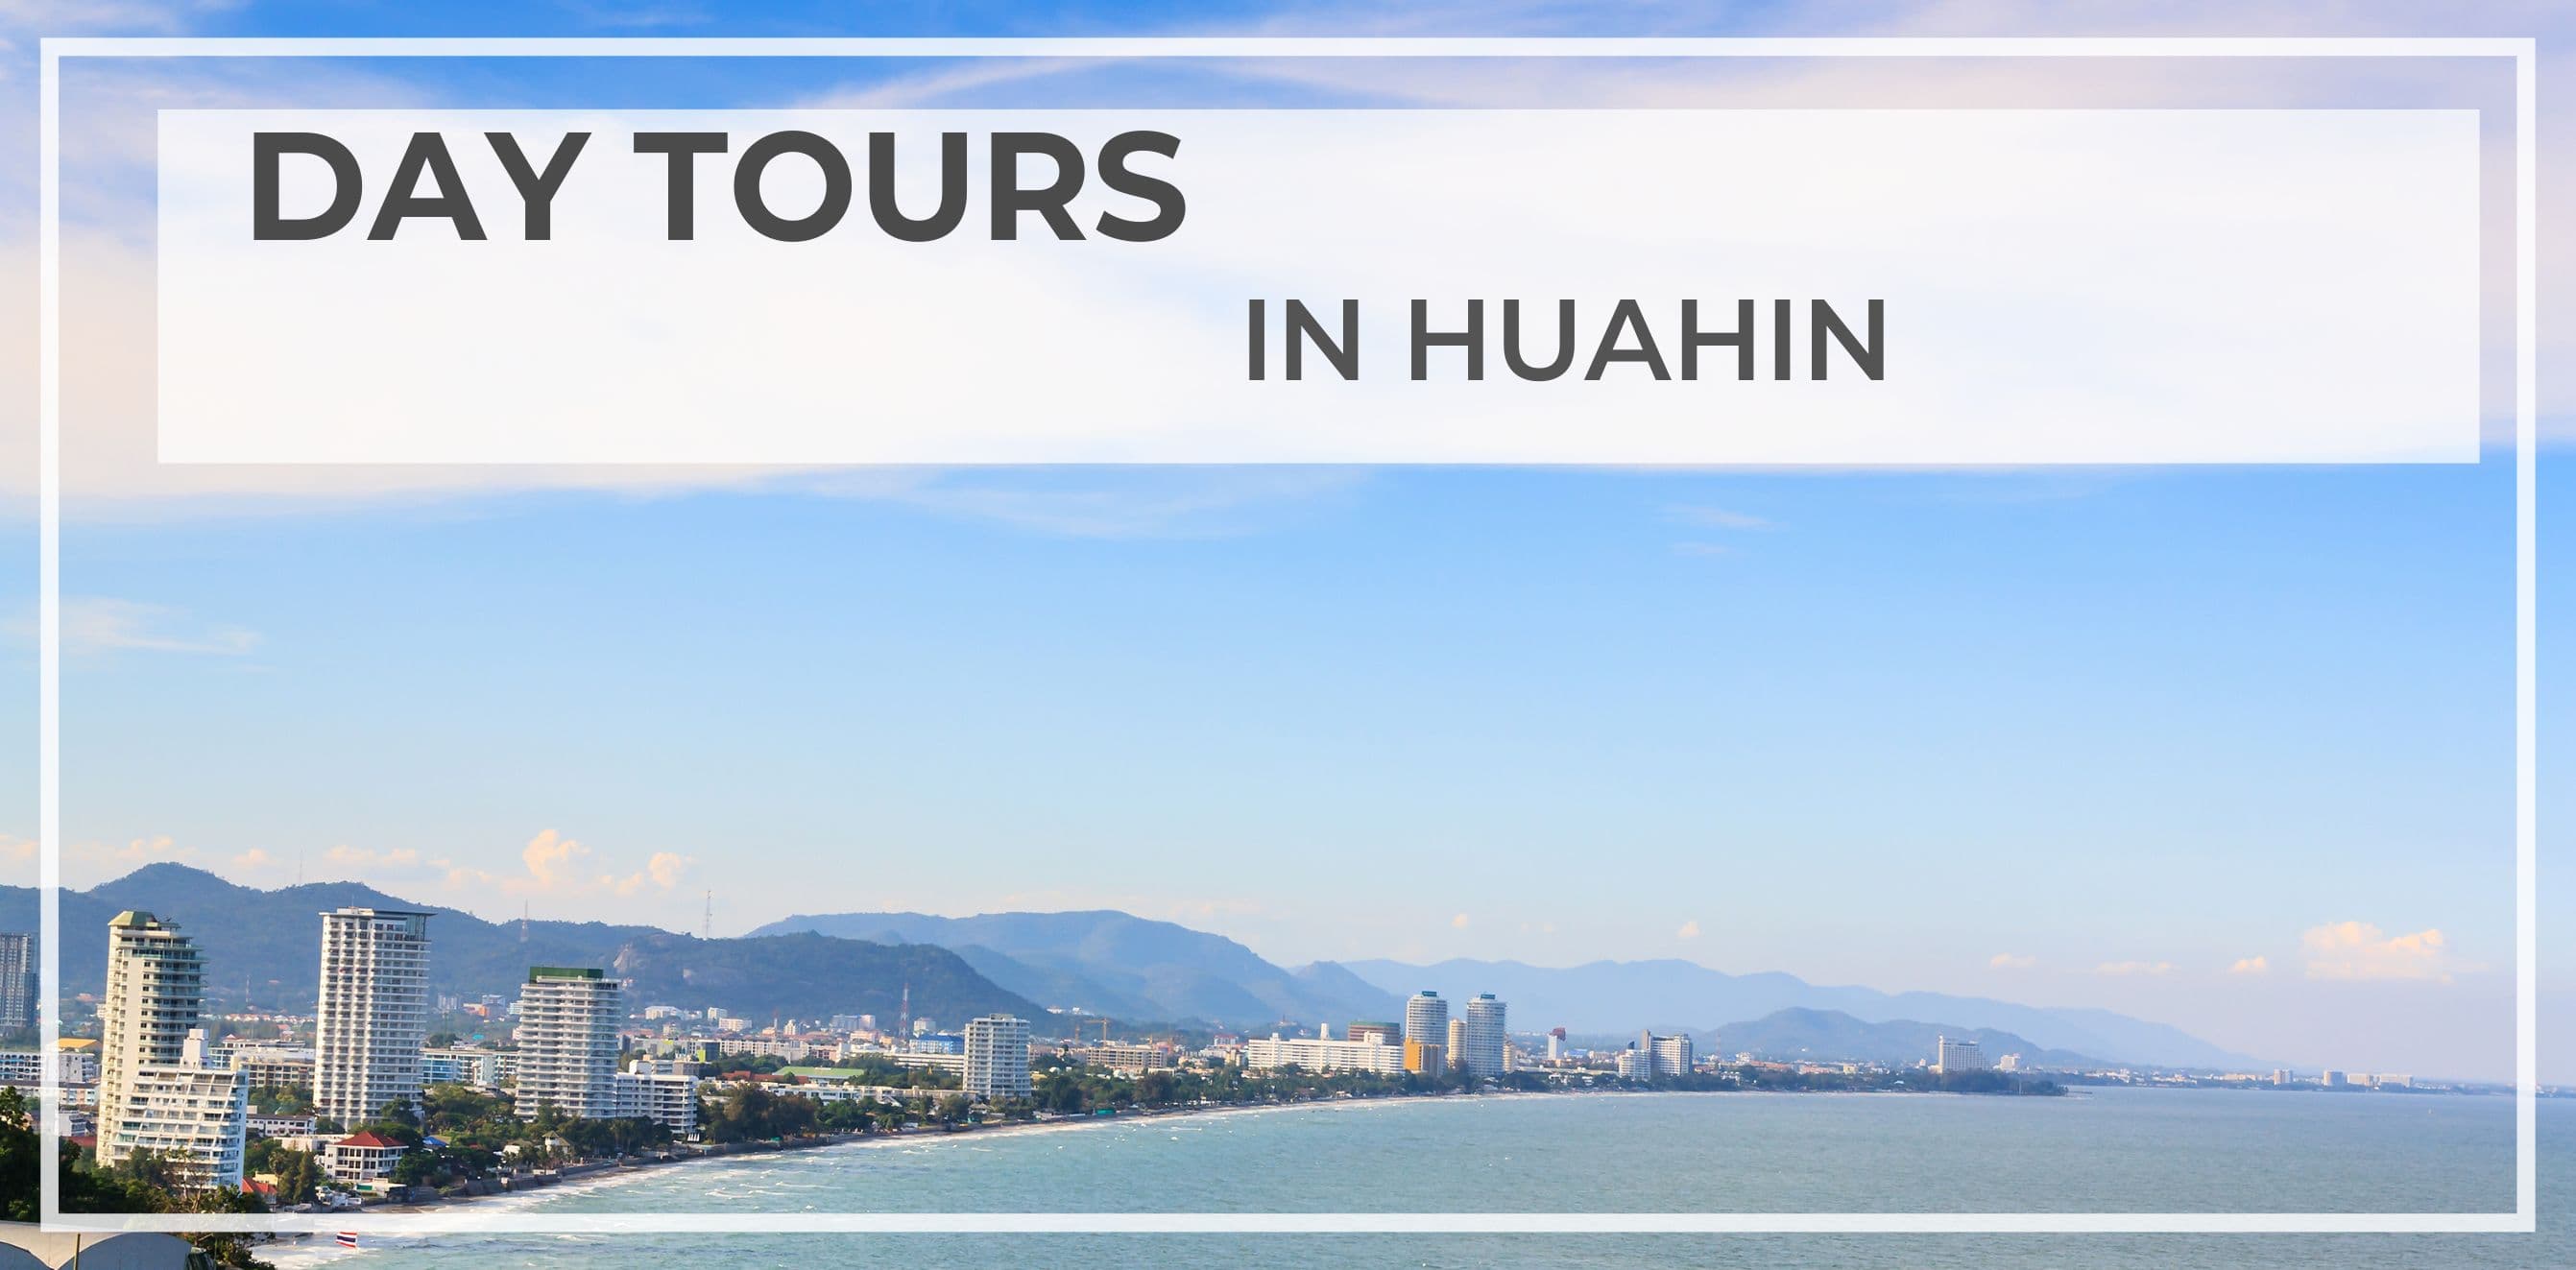 ONE DAY TOURS IN HUA HIN